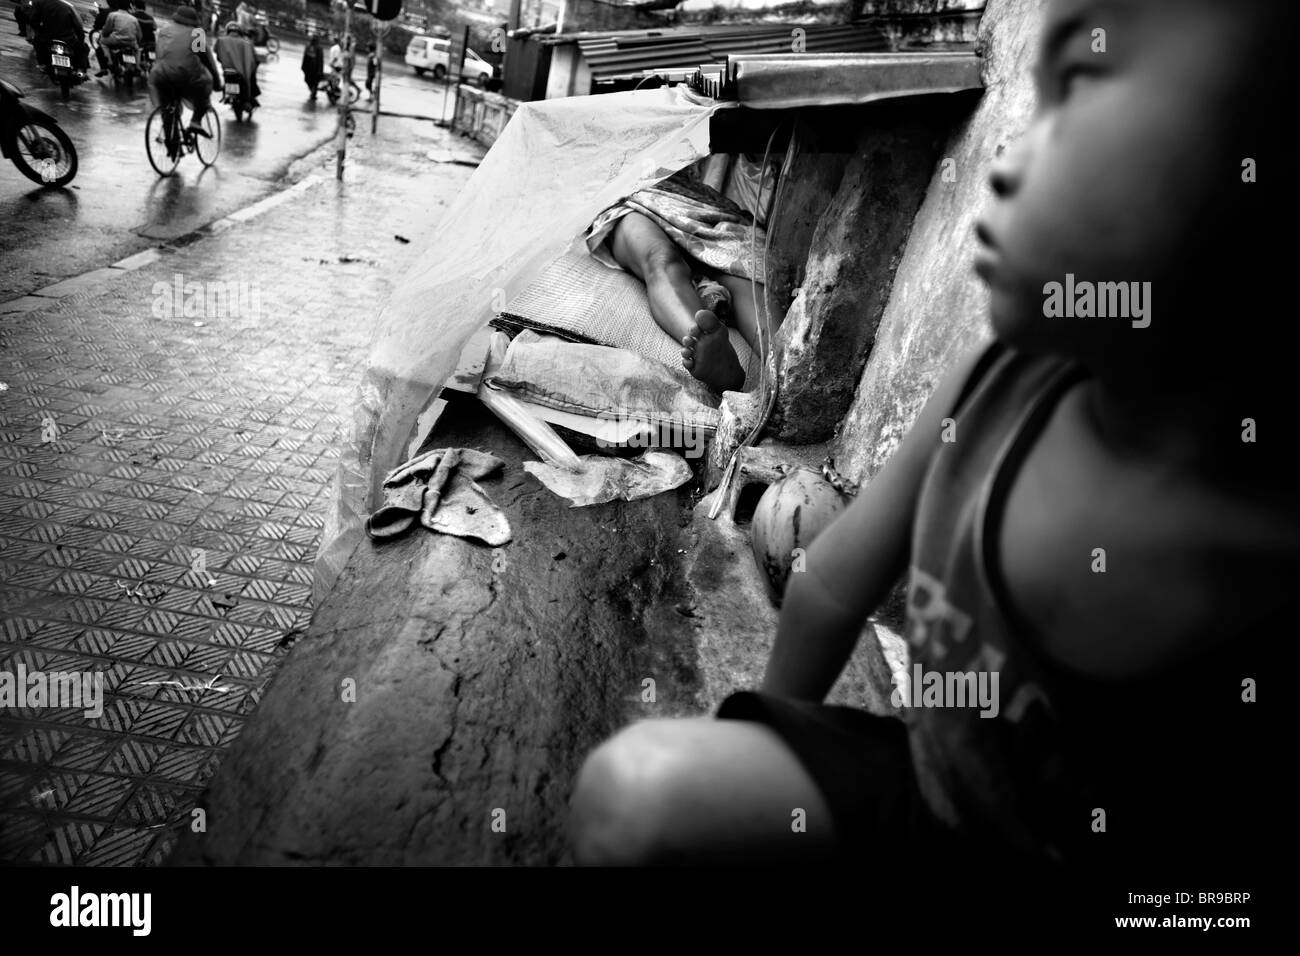 Son watches bypassers waiting for mother to wake in Hanoi Vietnam. Stock Photo